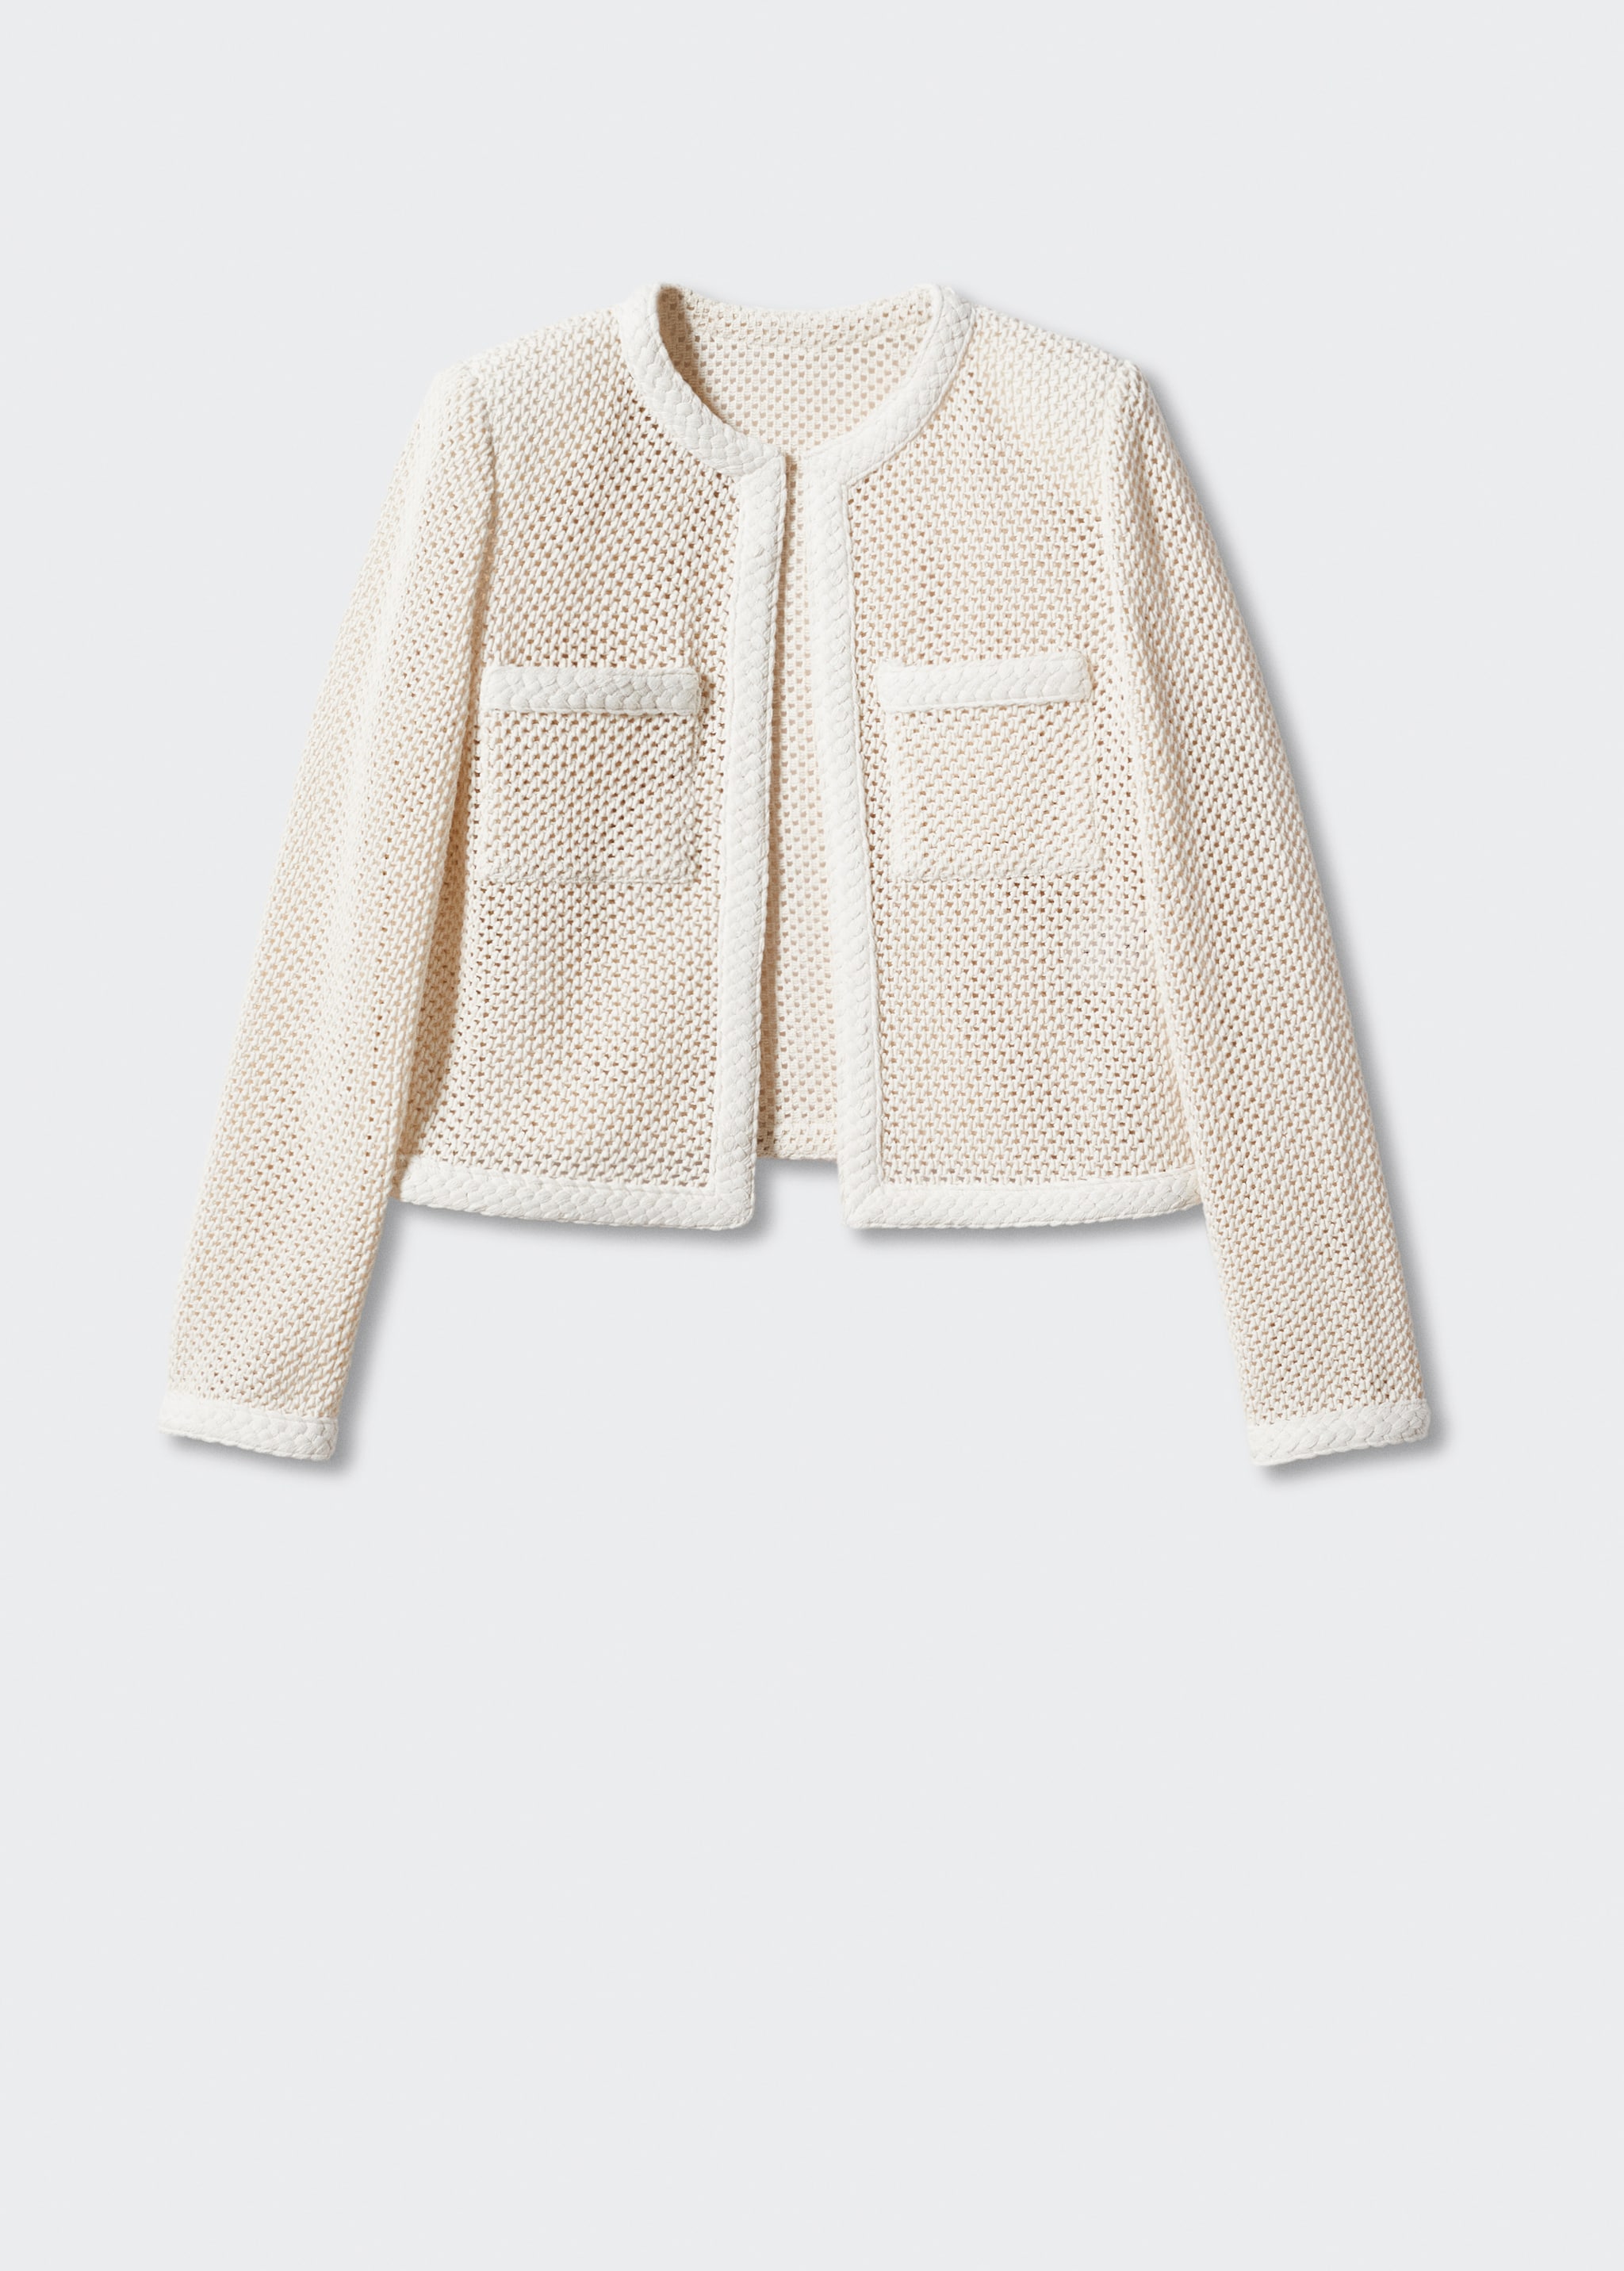 Openwork knitted jacket - Article without model